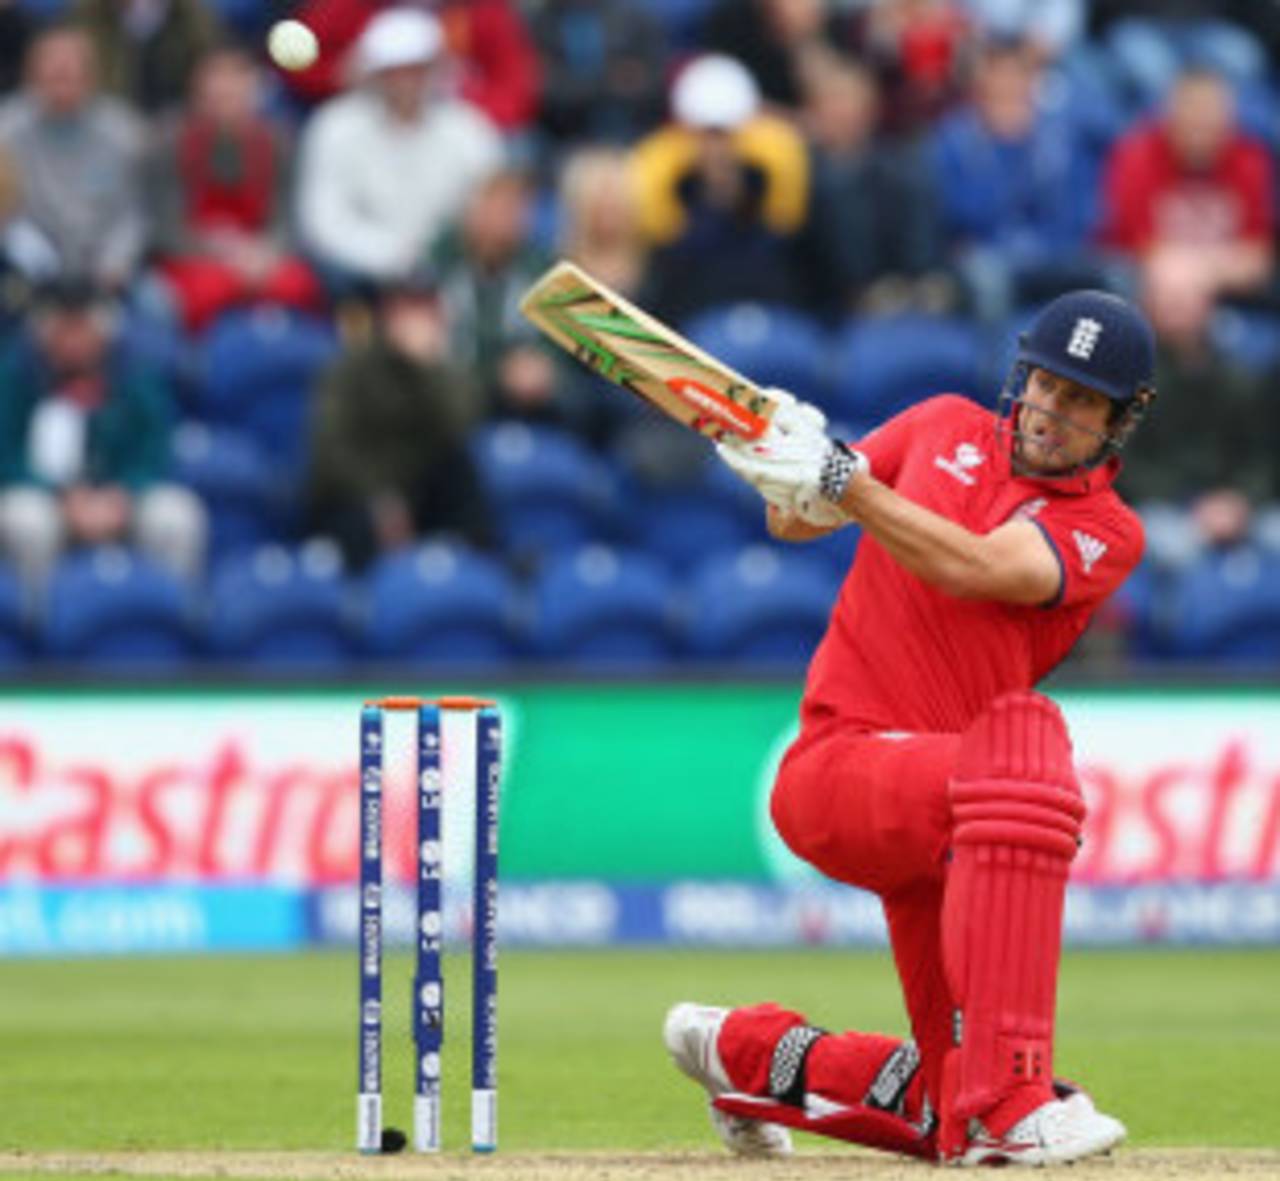 Alastair Cook plays a ramp over the keeper's head, England v New Zealand, Champions Trophy, Group A, Cardiff, June 16, 2013